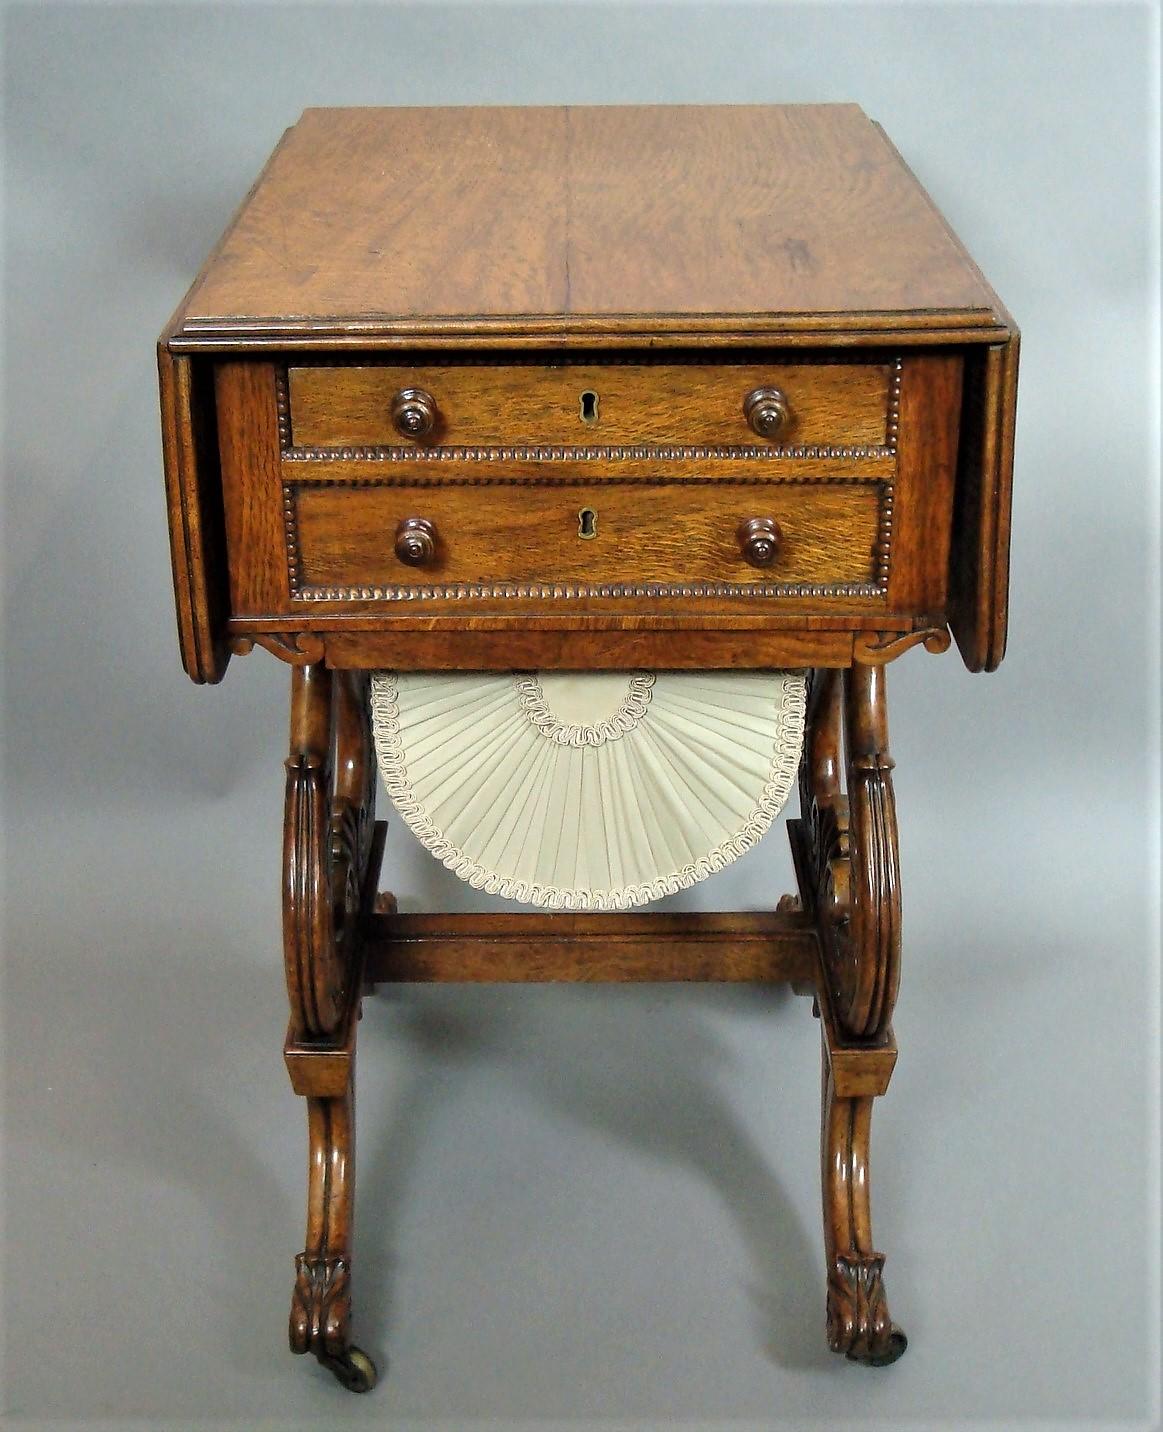 Late Regency pollard oak drop-flap work table; the well figured rectangular top with rounded corners above opposing mahogany lined drawers, including a dummy drawer to either side; with beaded mouldings and turned knob handles; above a sliding